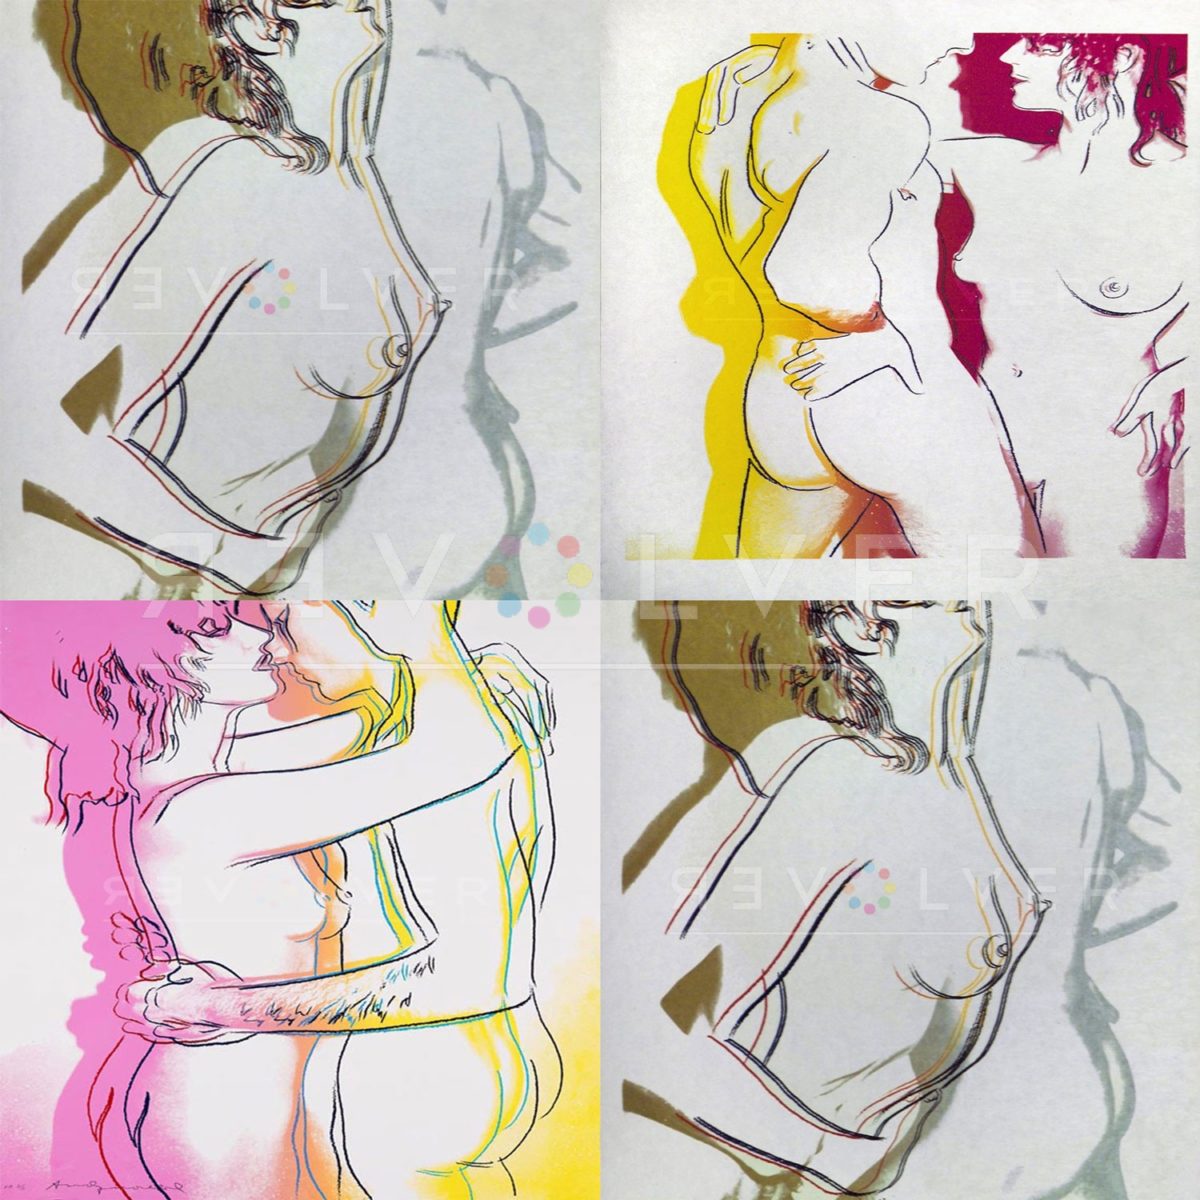 Andy Warhol Love complete portfolio image, showing all 3 screenprints with Revolver watermark.